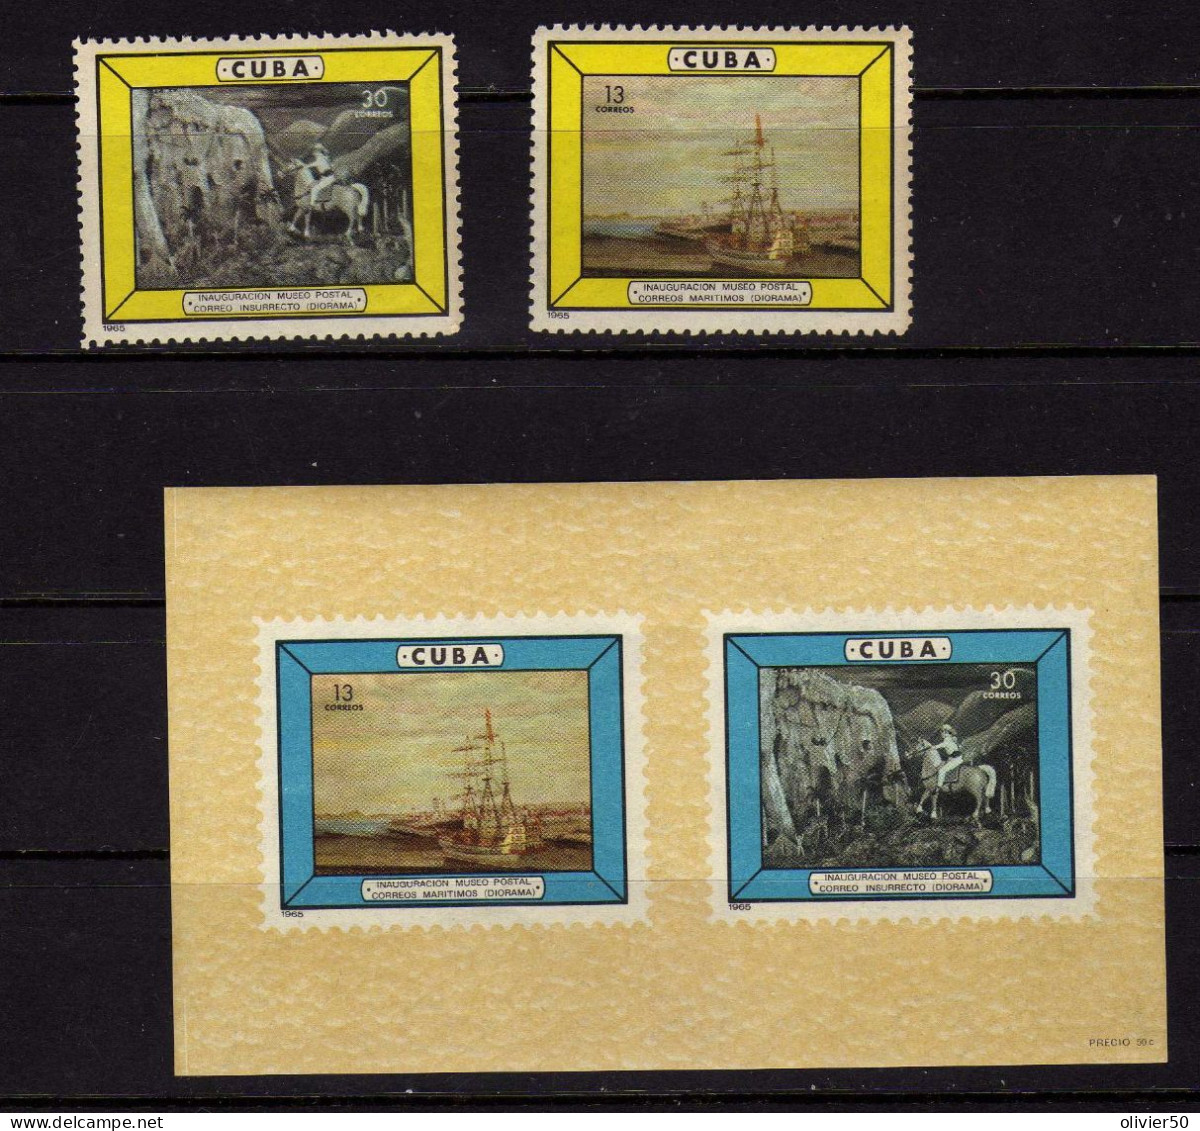 Cuba - 1965 - Ouverture Du Musee Postal - Tableaux - Neuf** - MNH - Unused Stamps